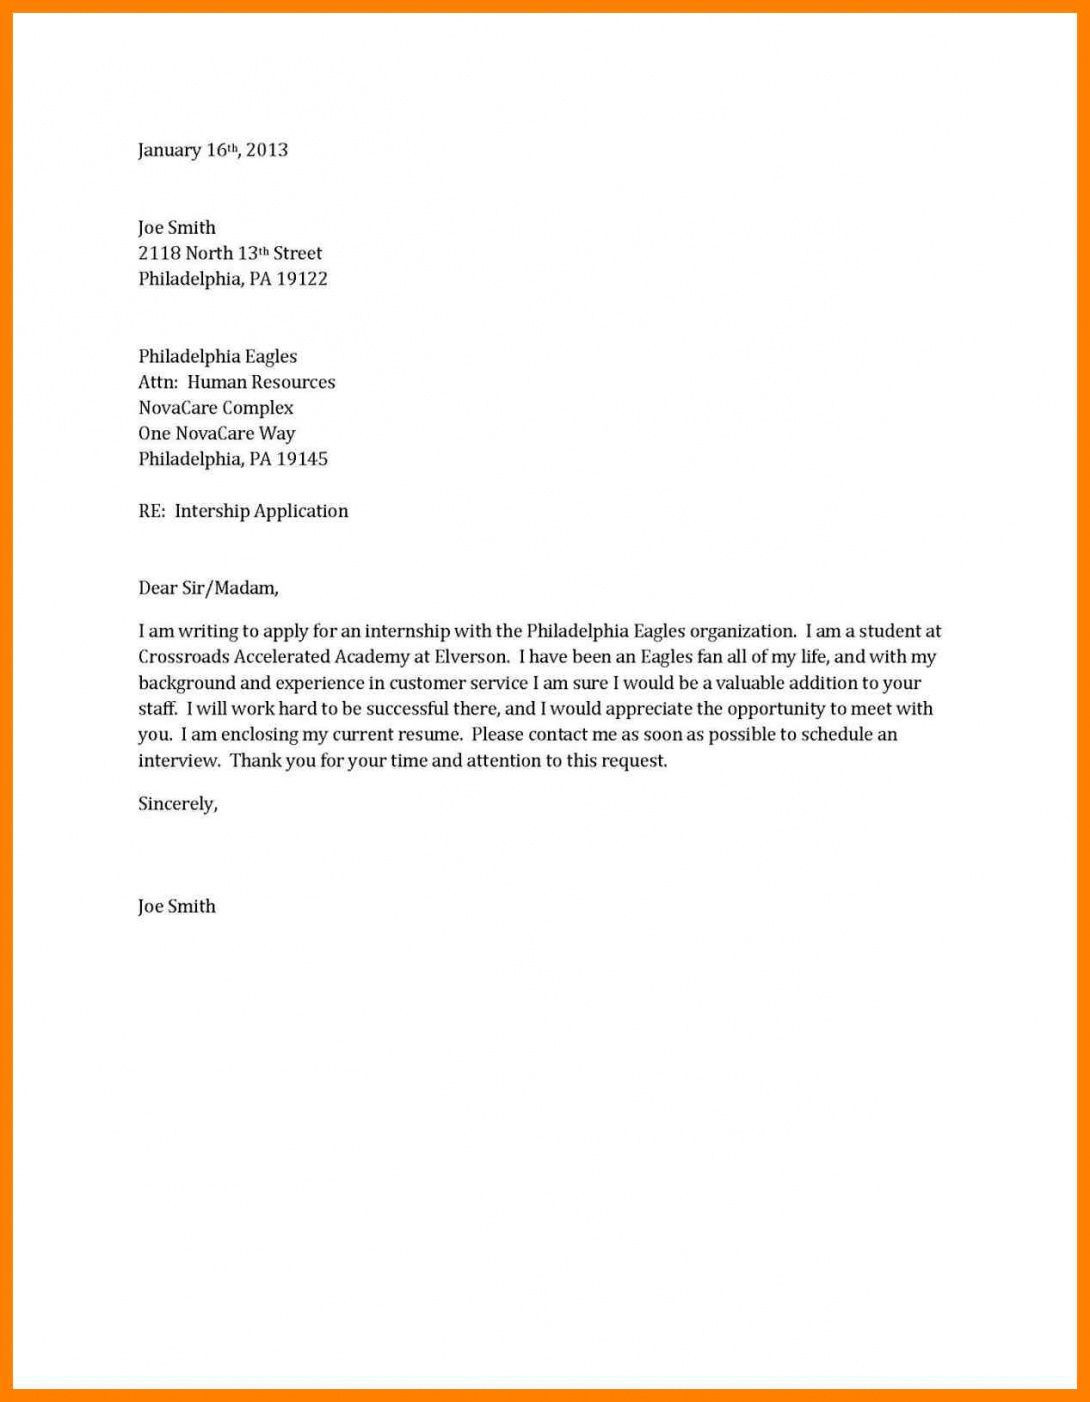 Sample Cover Letter for Resume Indeed Cover Letter Template Indeed – Resume format Job Cover Letter …